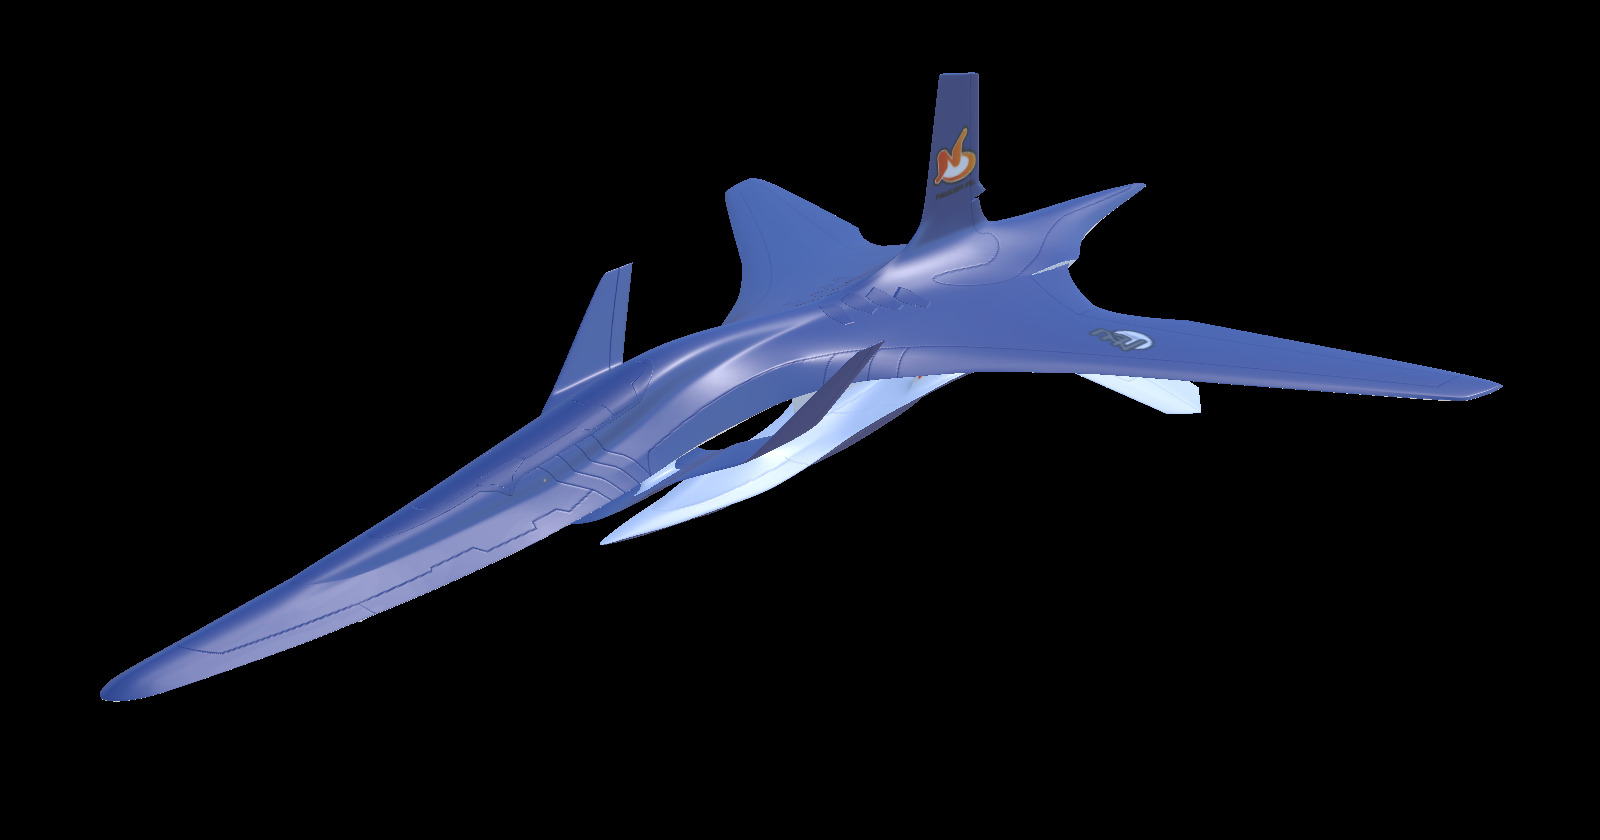 From ACE COMBAT 3, it is Delphinus#3.
It is a work aimed at reproducing the opening CG 3d model